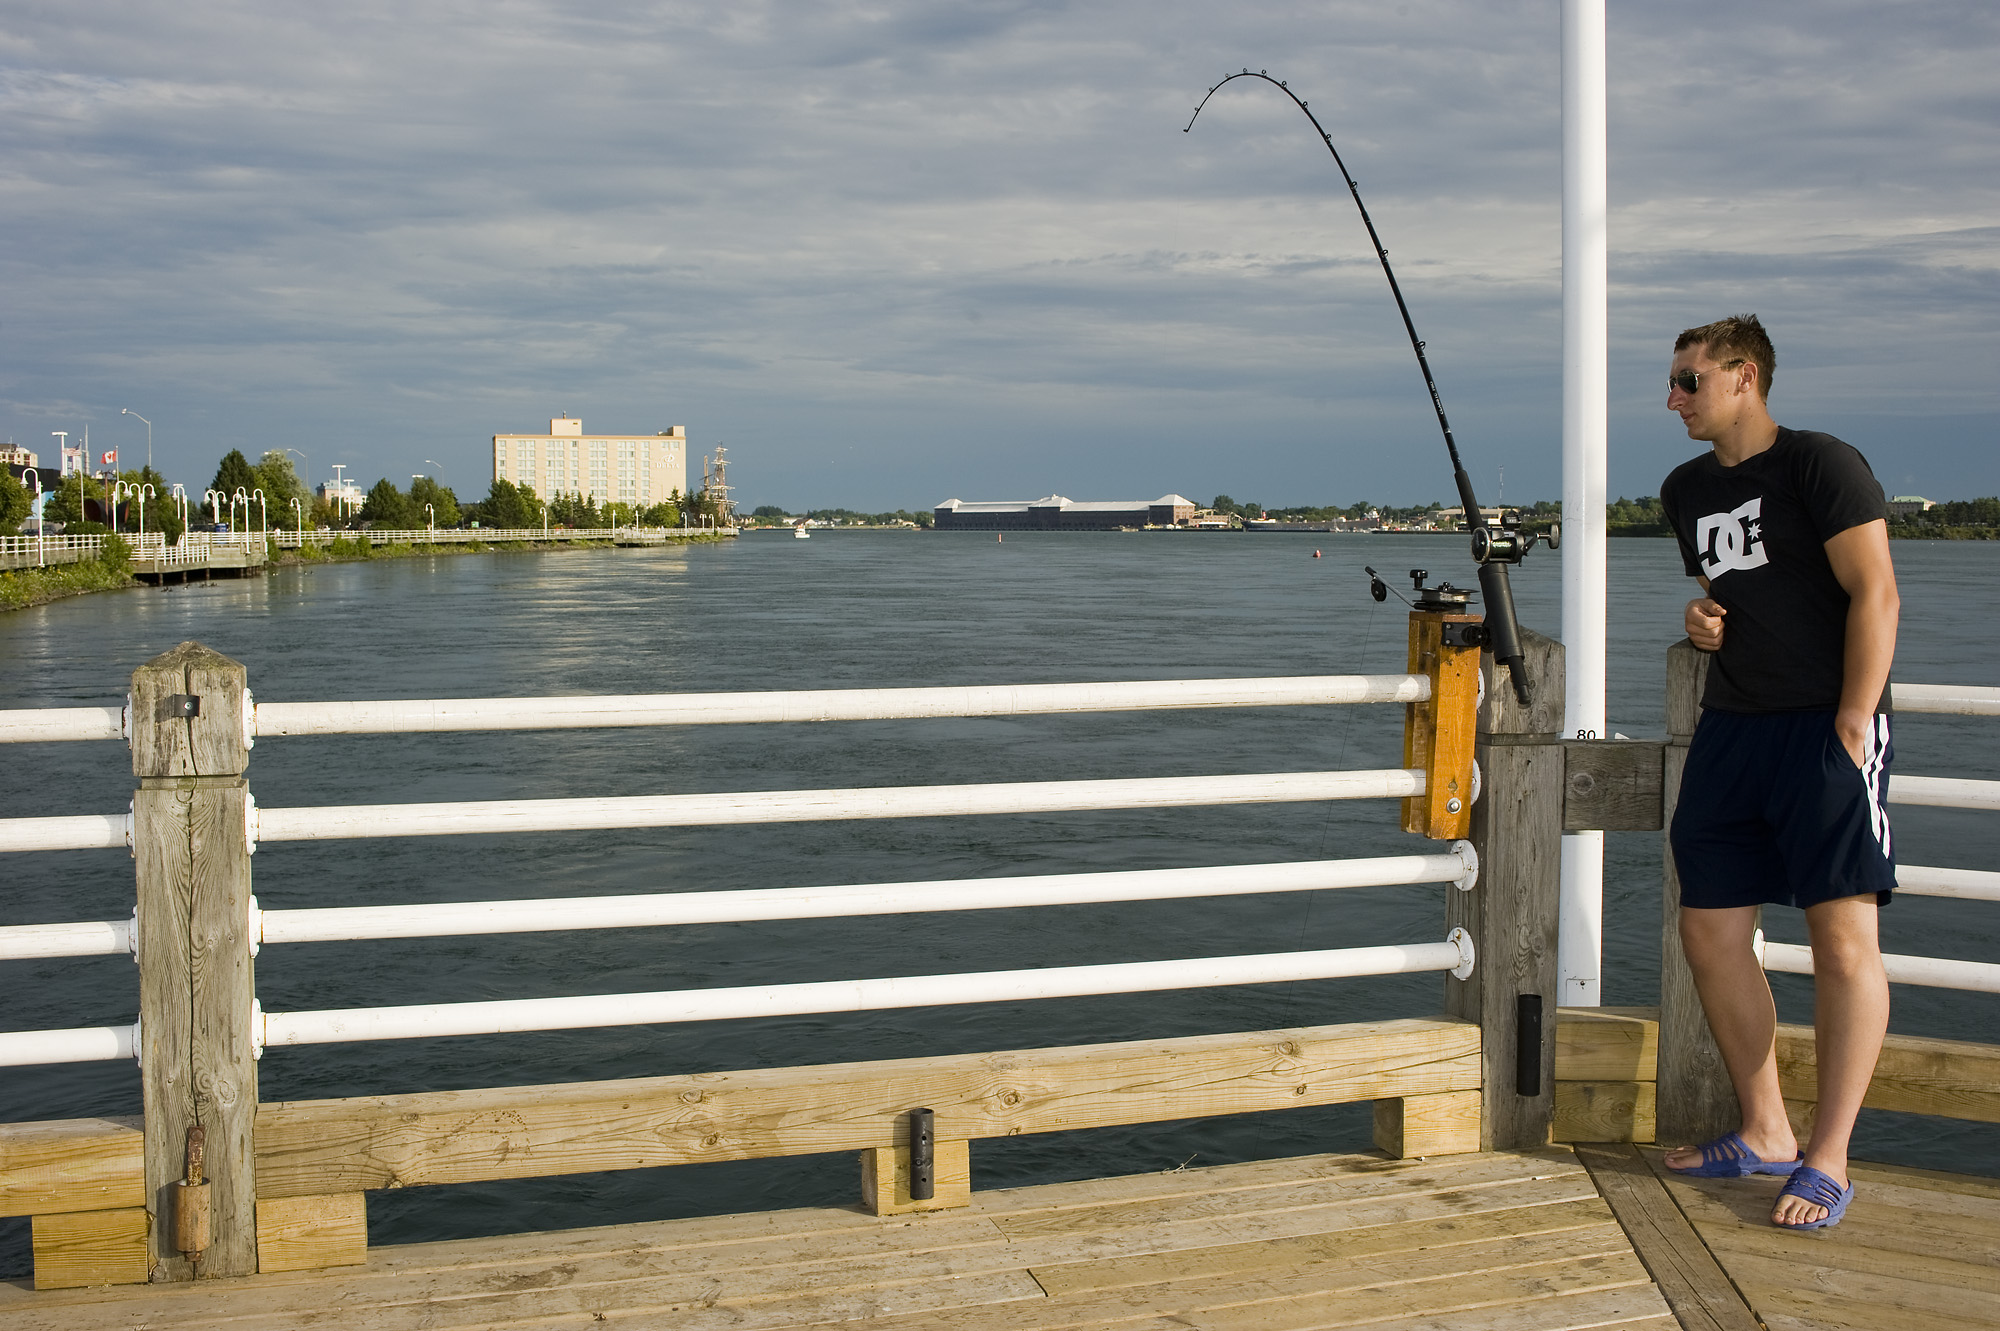 a man wearing shorts and sunglasses leans against the railing as he stands on a fishing platform in Sault Ste. Marie. He is looking at the large fishing pole that sits in a holder on the railing, the pole bending slightly with the weight on the line.